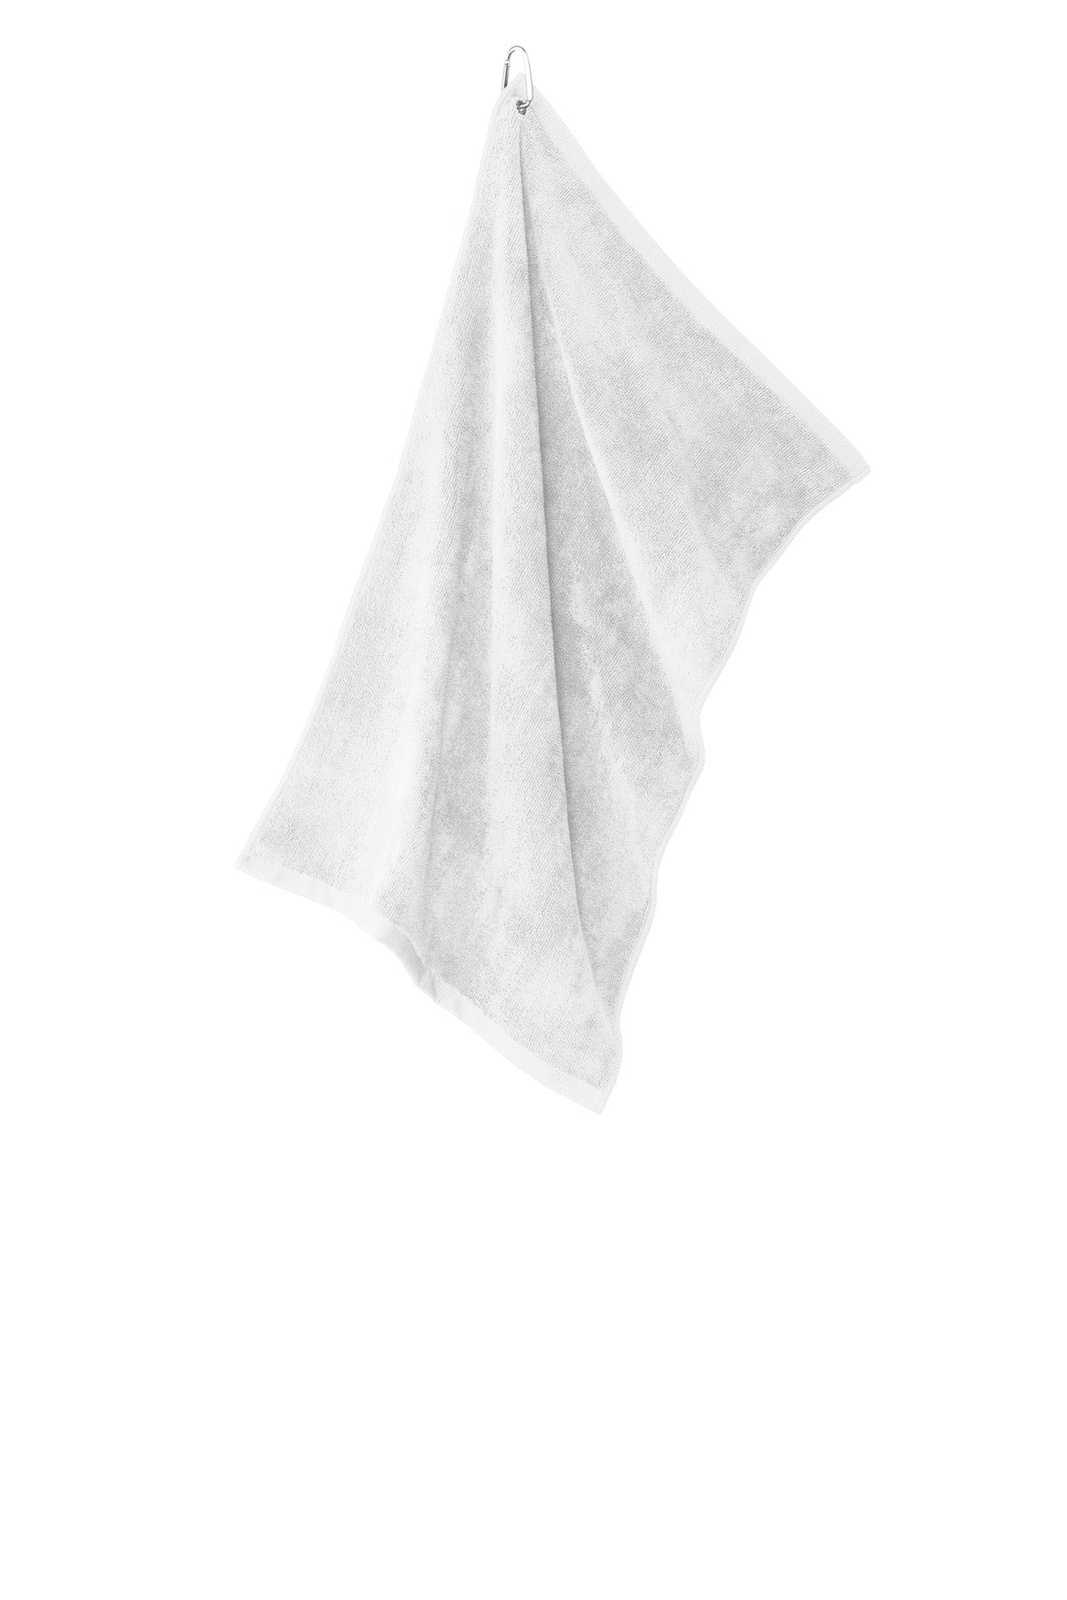 Port Authority TW530 Grommeted Microfiber Golf Towel - White - HIT a Double - 1